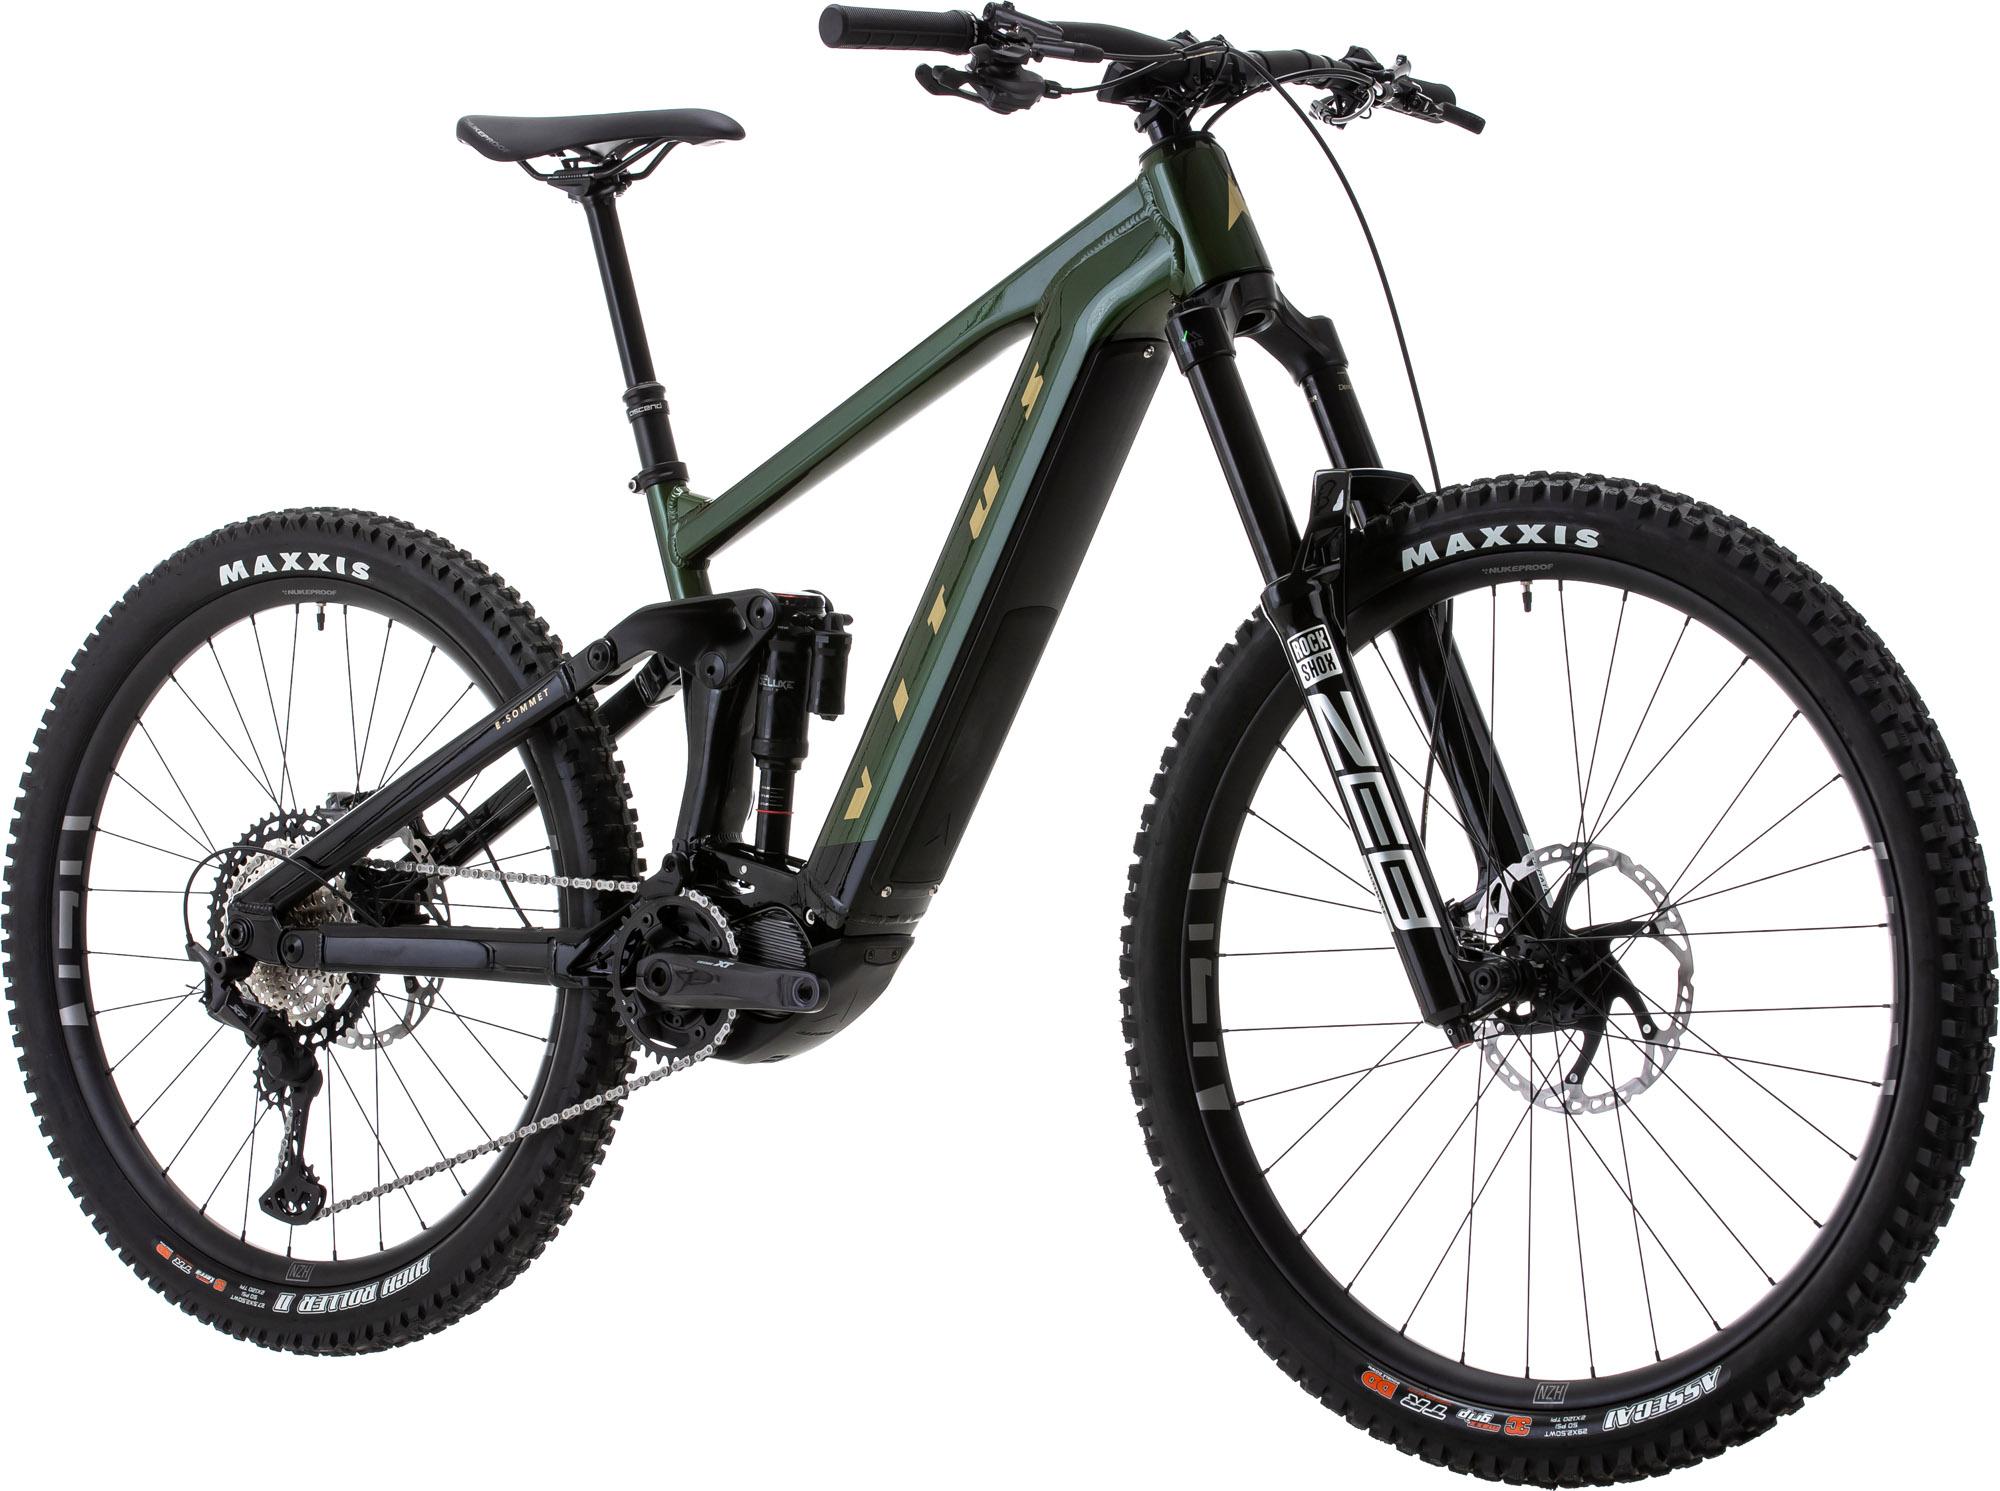 Vitus E-sommet 297 Vrx Mountain Bike (updated Cable Routing - 2022) - Racing Green